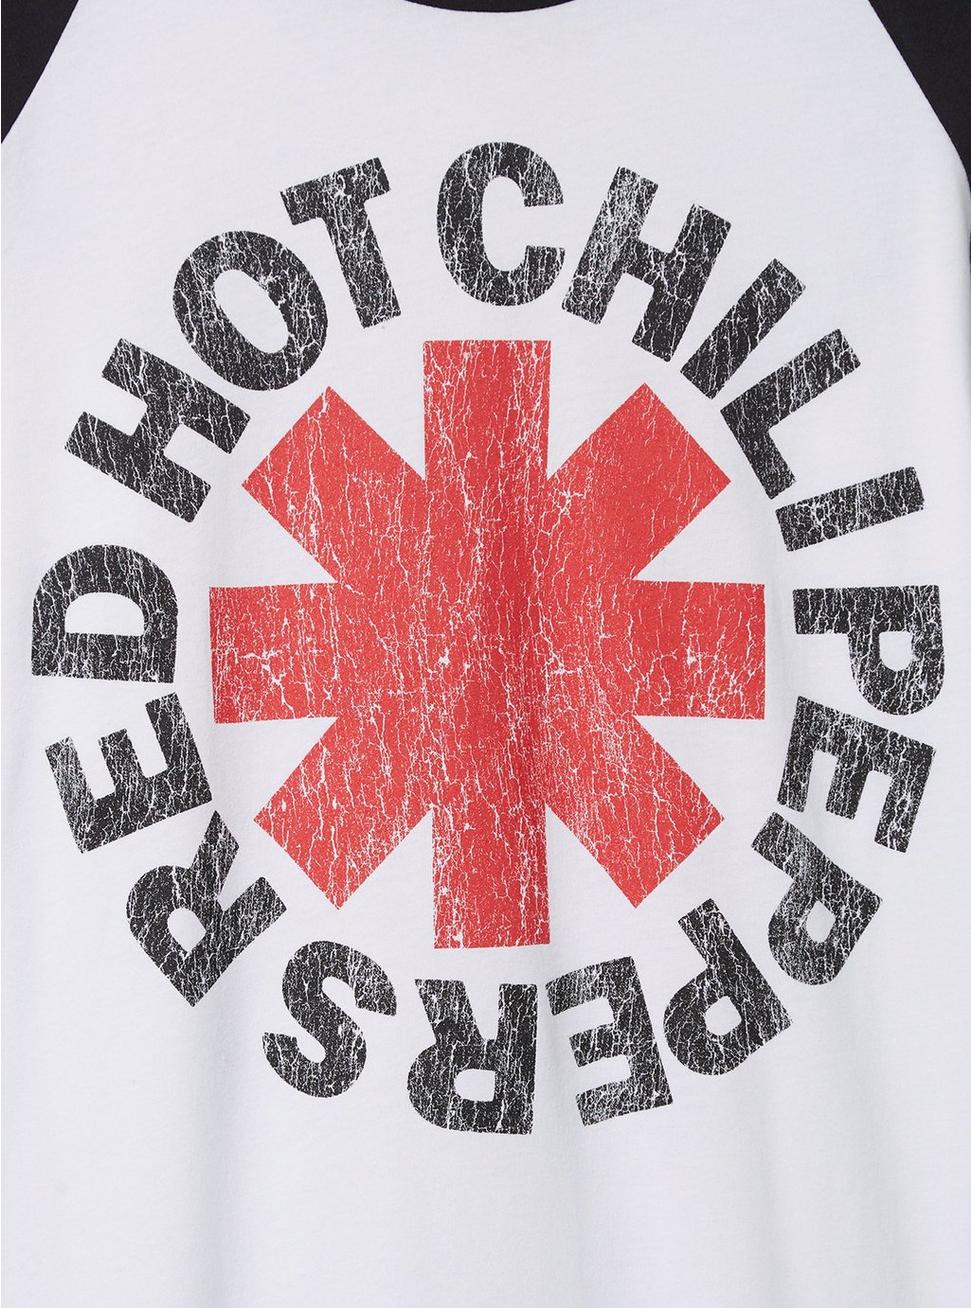 Plus Size Red Hot Chili Peppers Classic Fit Cotton Raglan Tee, BRIGHT WHITE, alternate